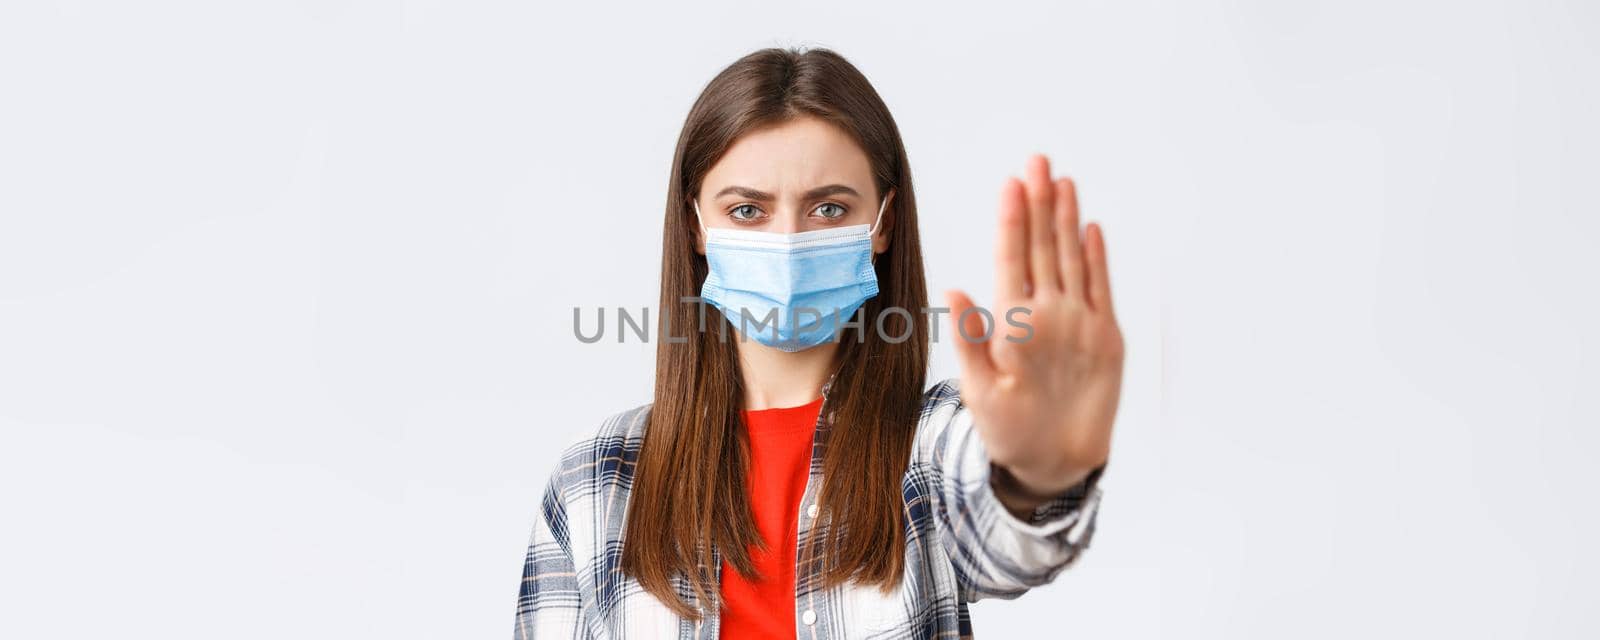 Coronavirus outbreak, leisure on quarantine, social distancing and emotions concept. Close-up of serious determined young woman want prevent or stop smth, stretch hand in restriction or warning.